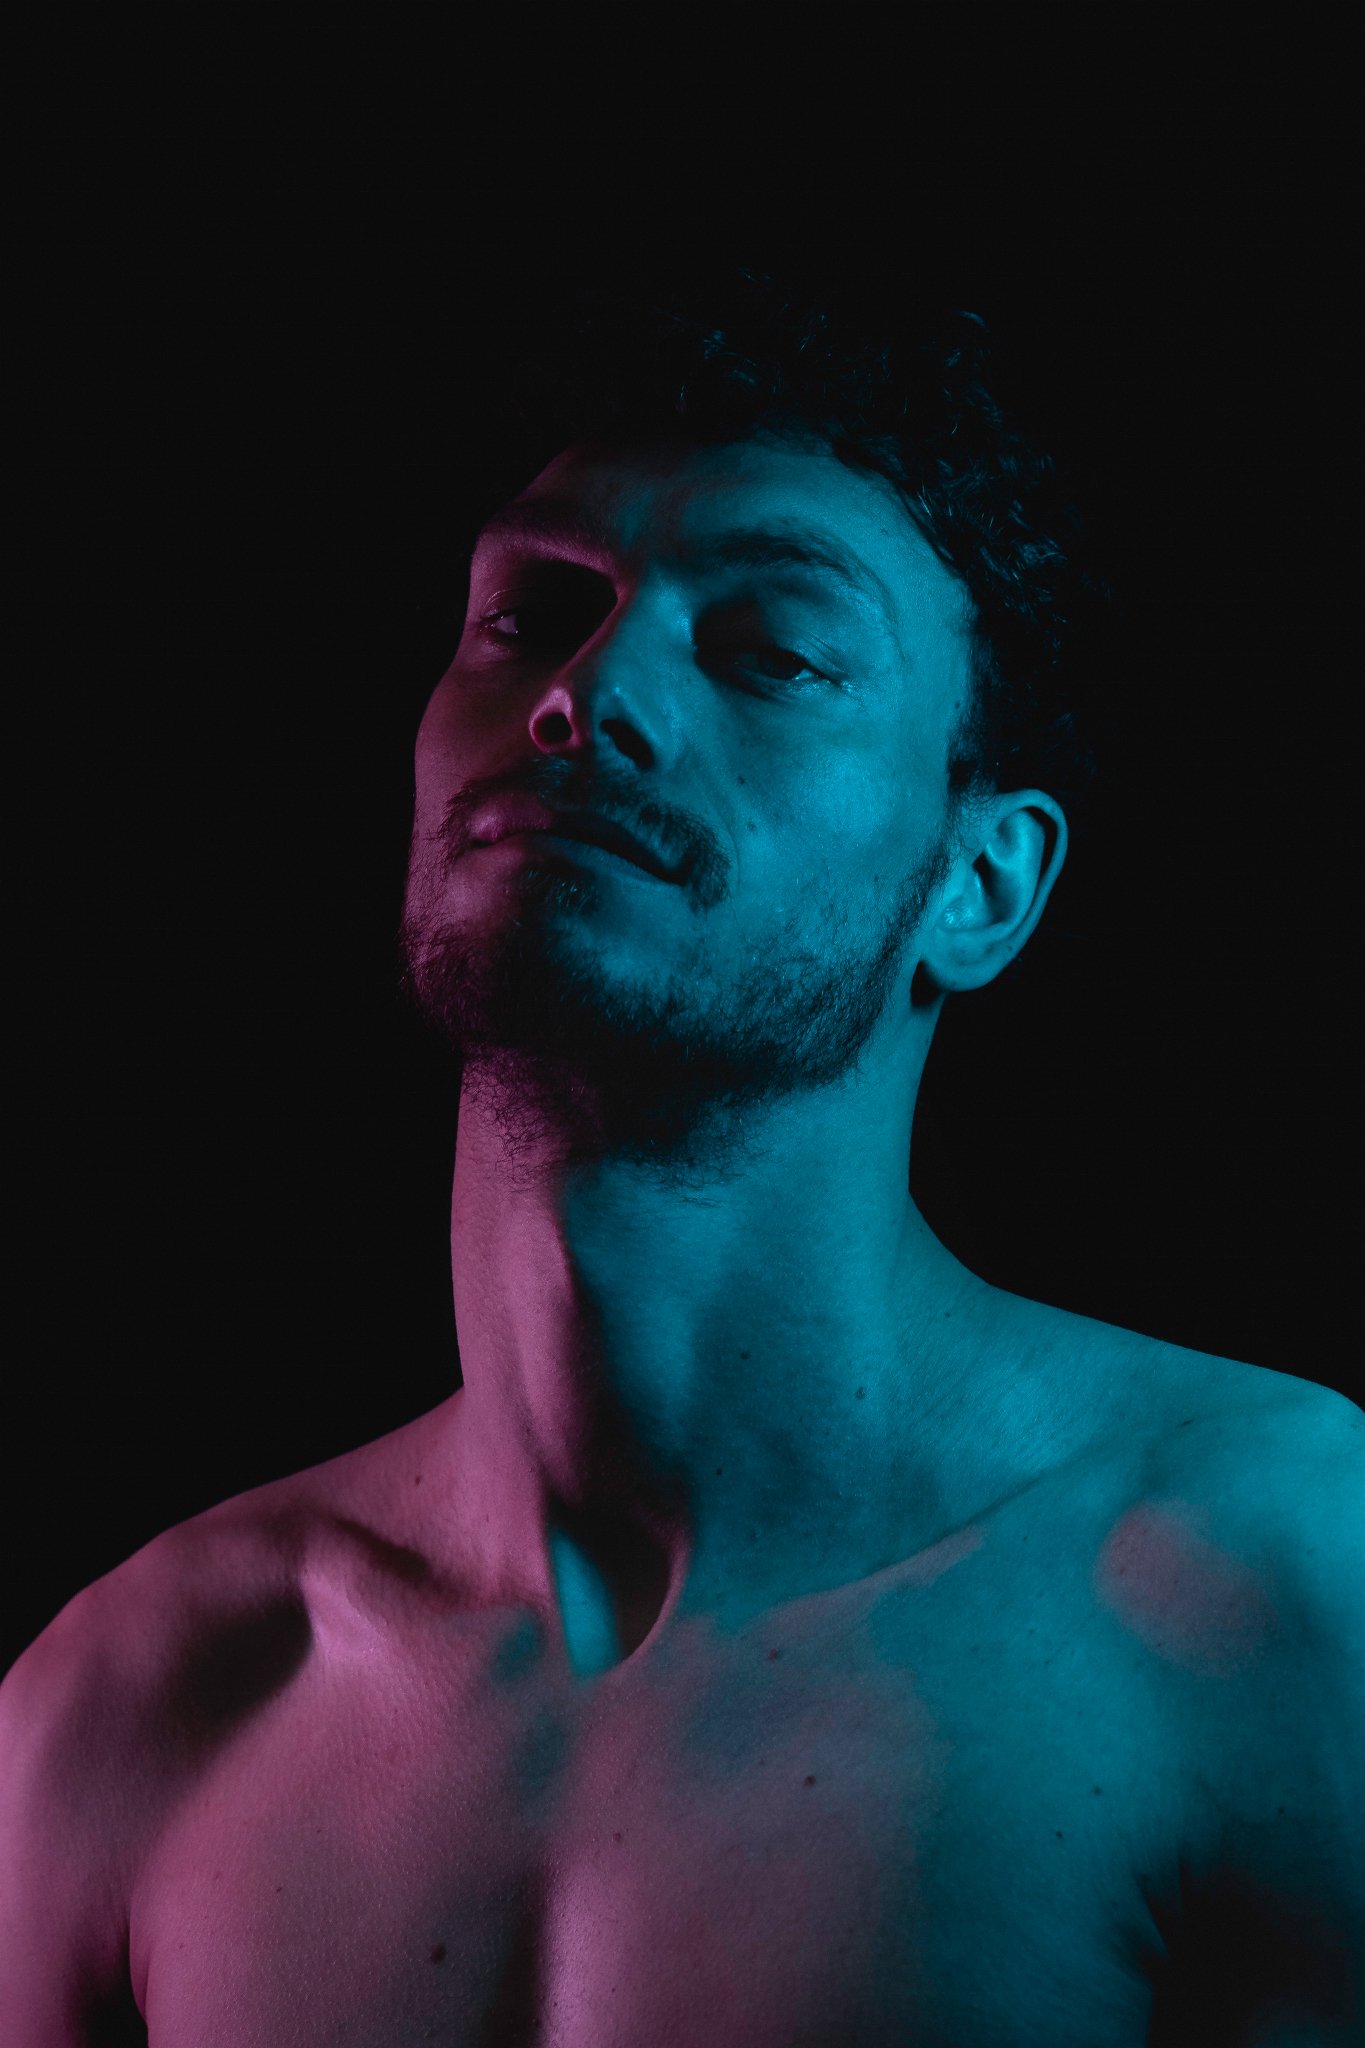 Male Portrait with RGB Lights